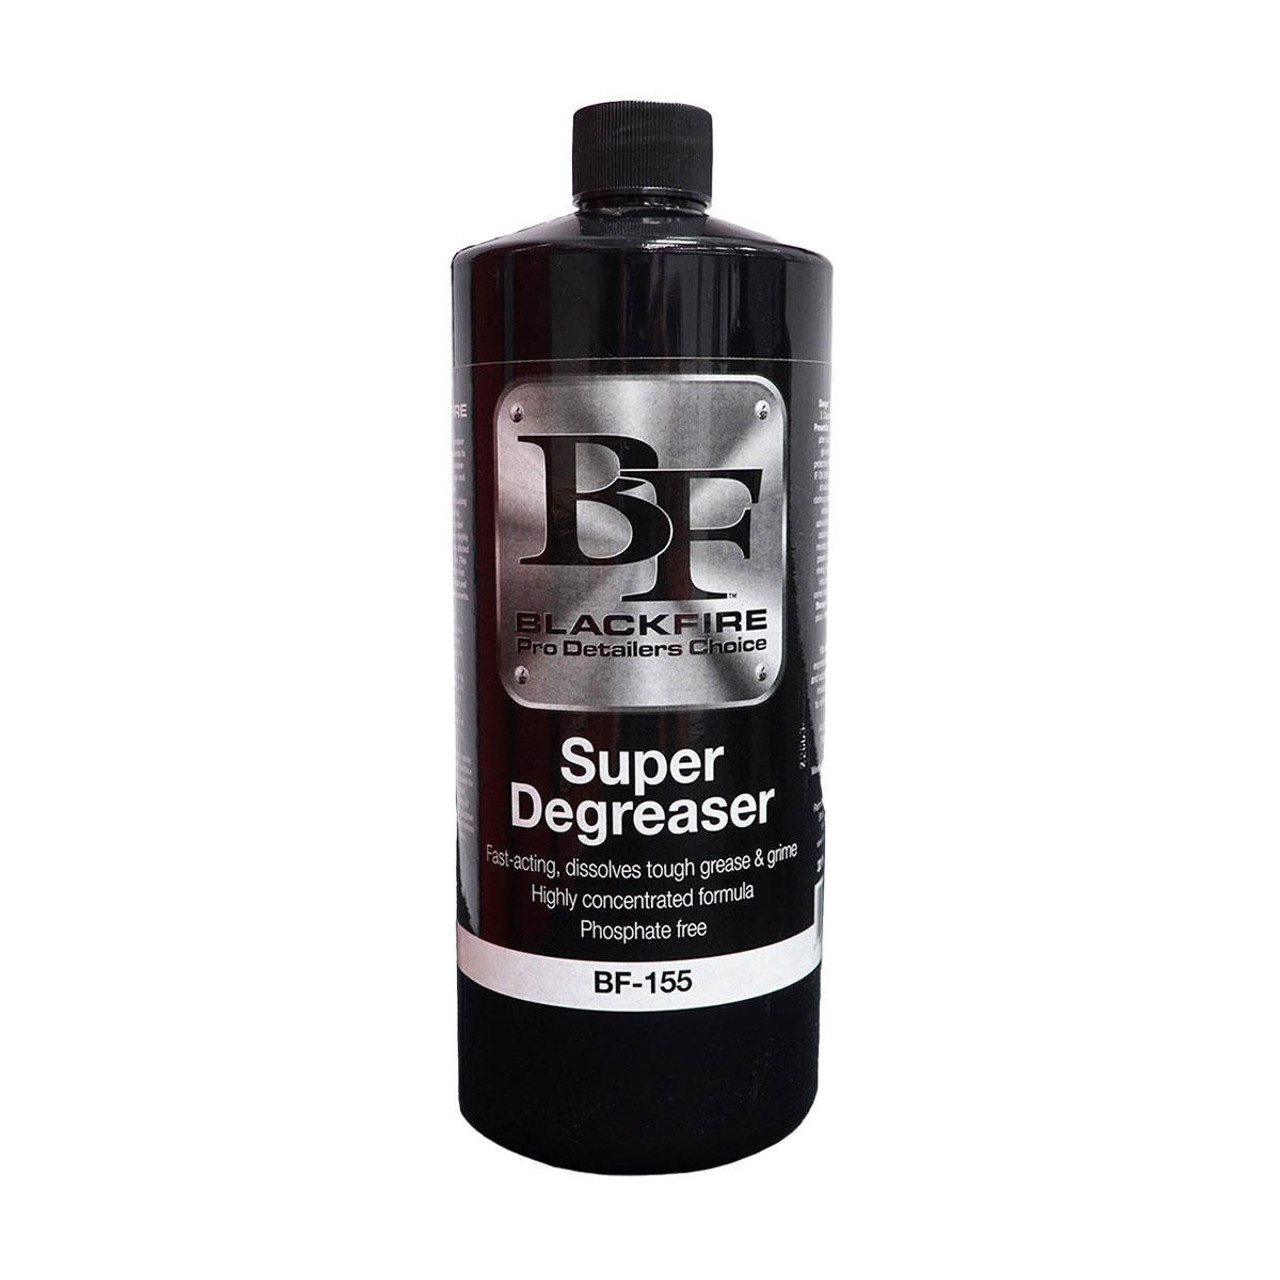 Engine Bay Cleaner Car Care Oil Grease Remover Decontamination Cleaning for  Engine Compartment Auto Refurbish and